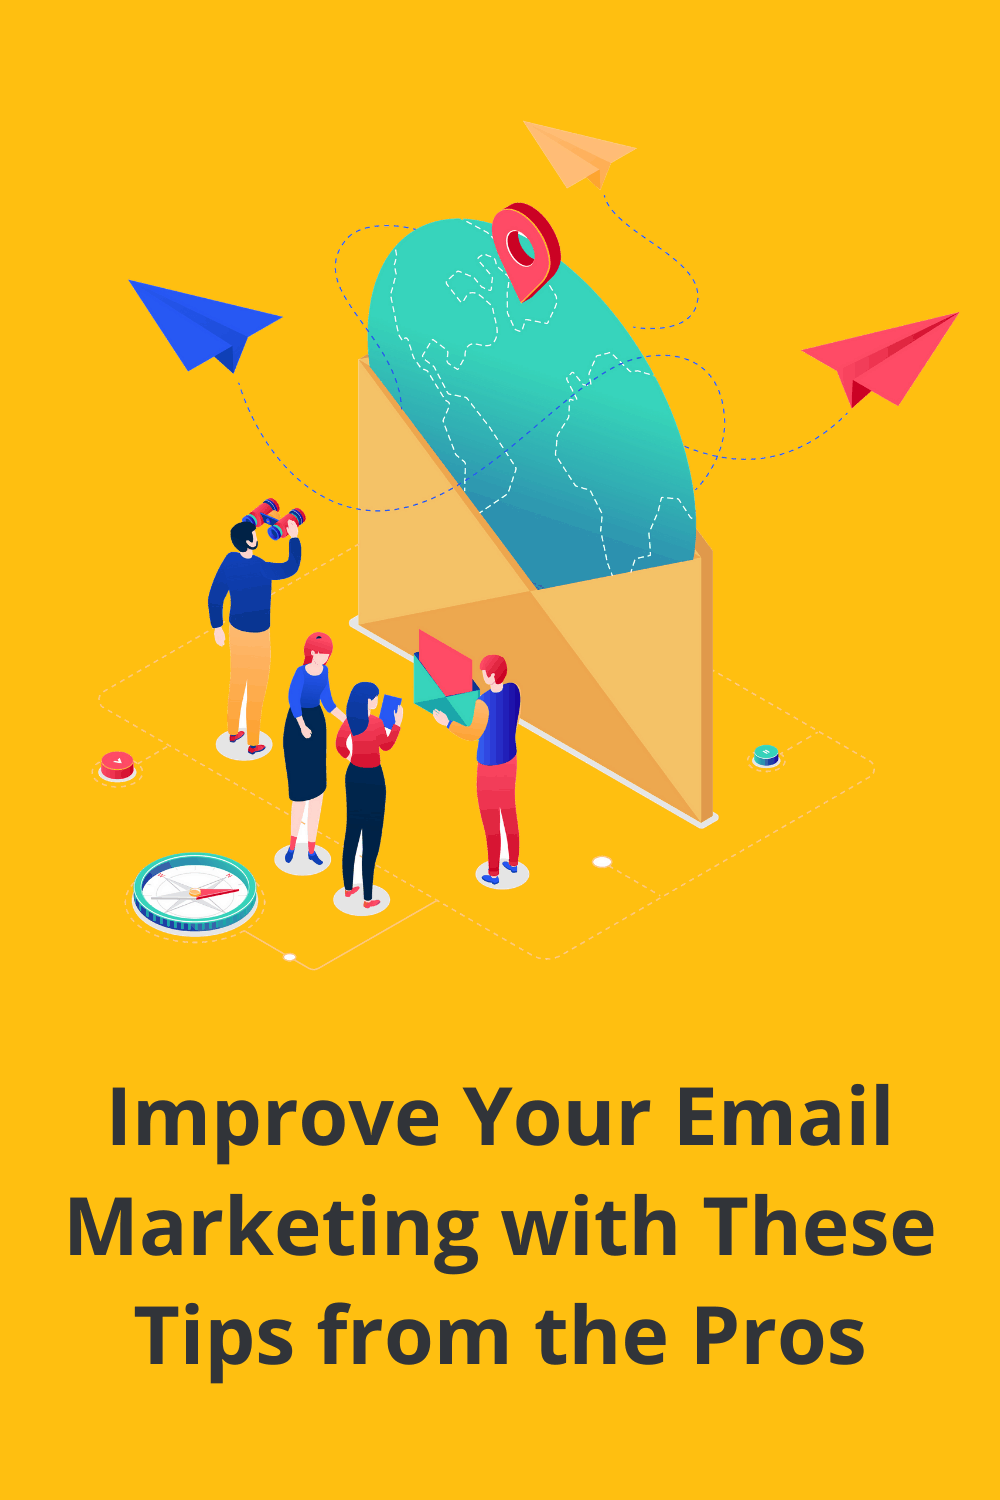 You already know the basics of email marketing, but you may not know how to get the most for your email marketing investment. Here are tips from email marketing pros to help you. via @scopedesign